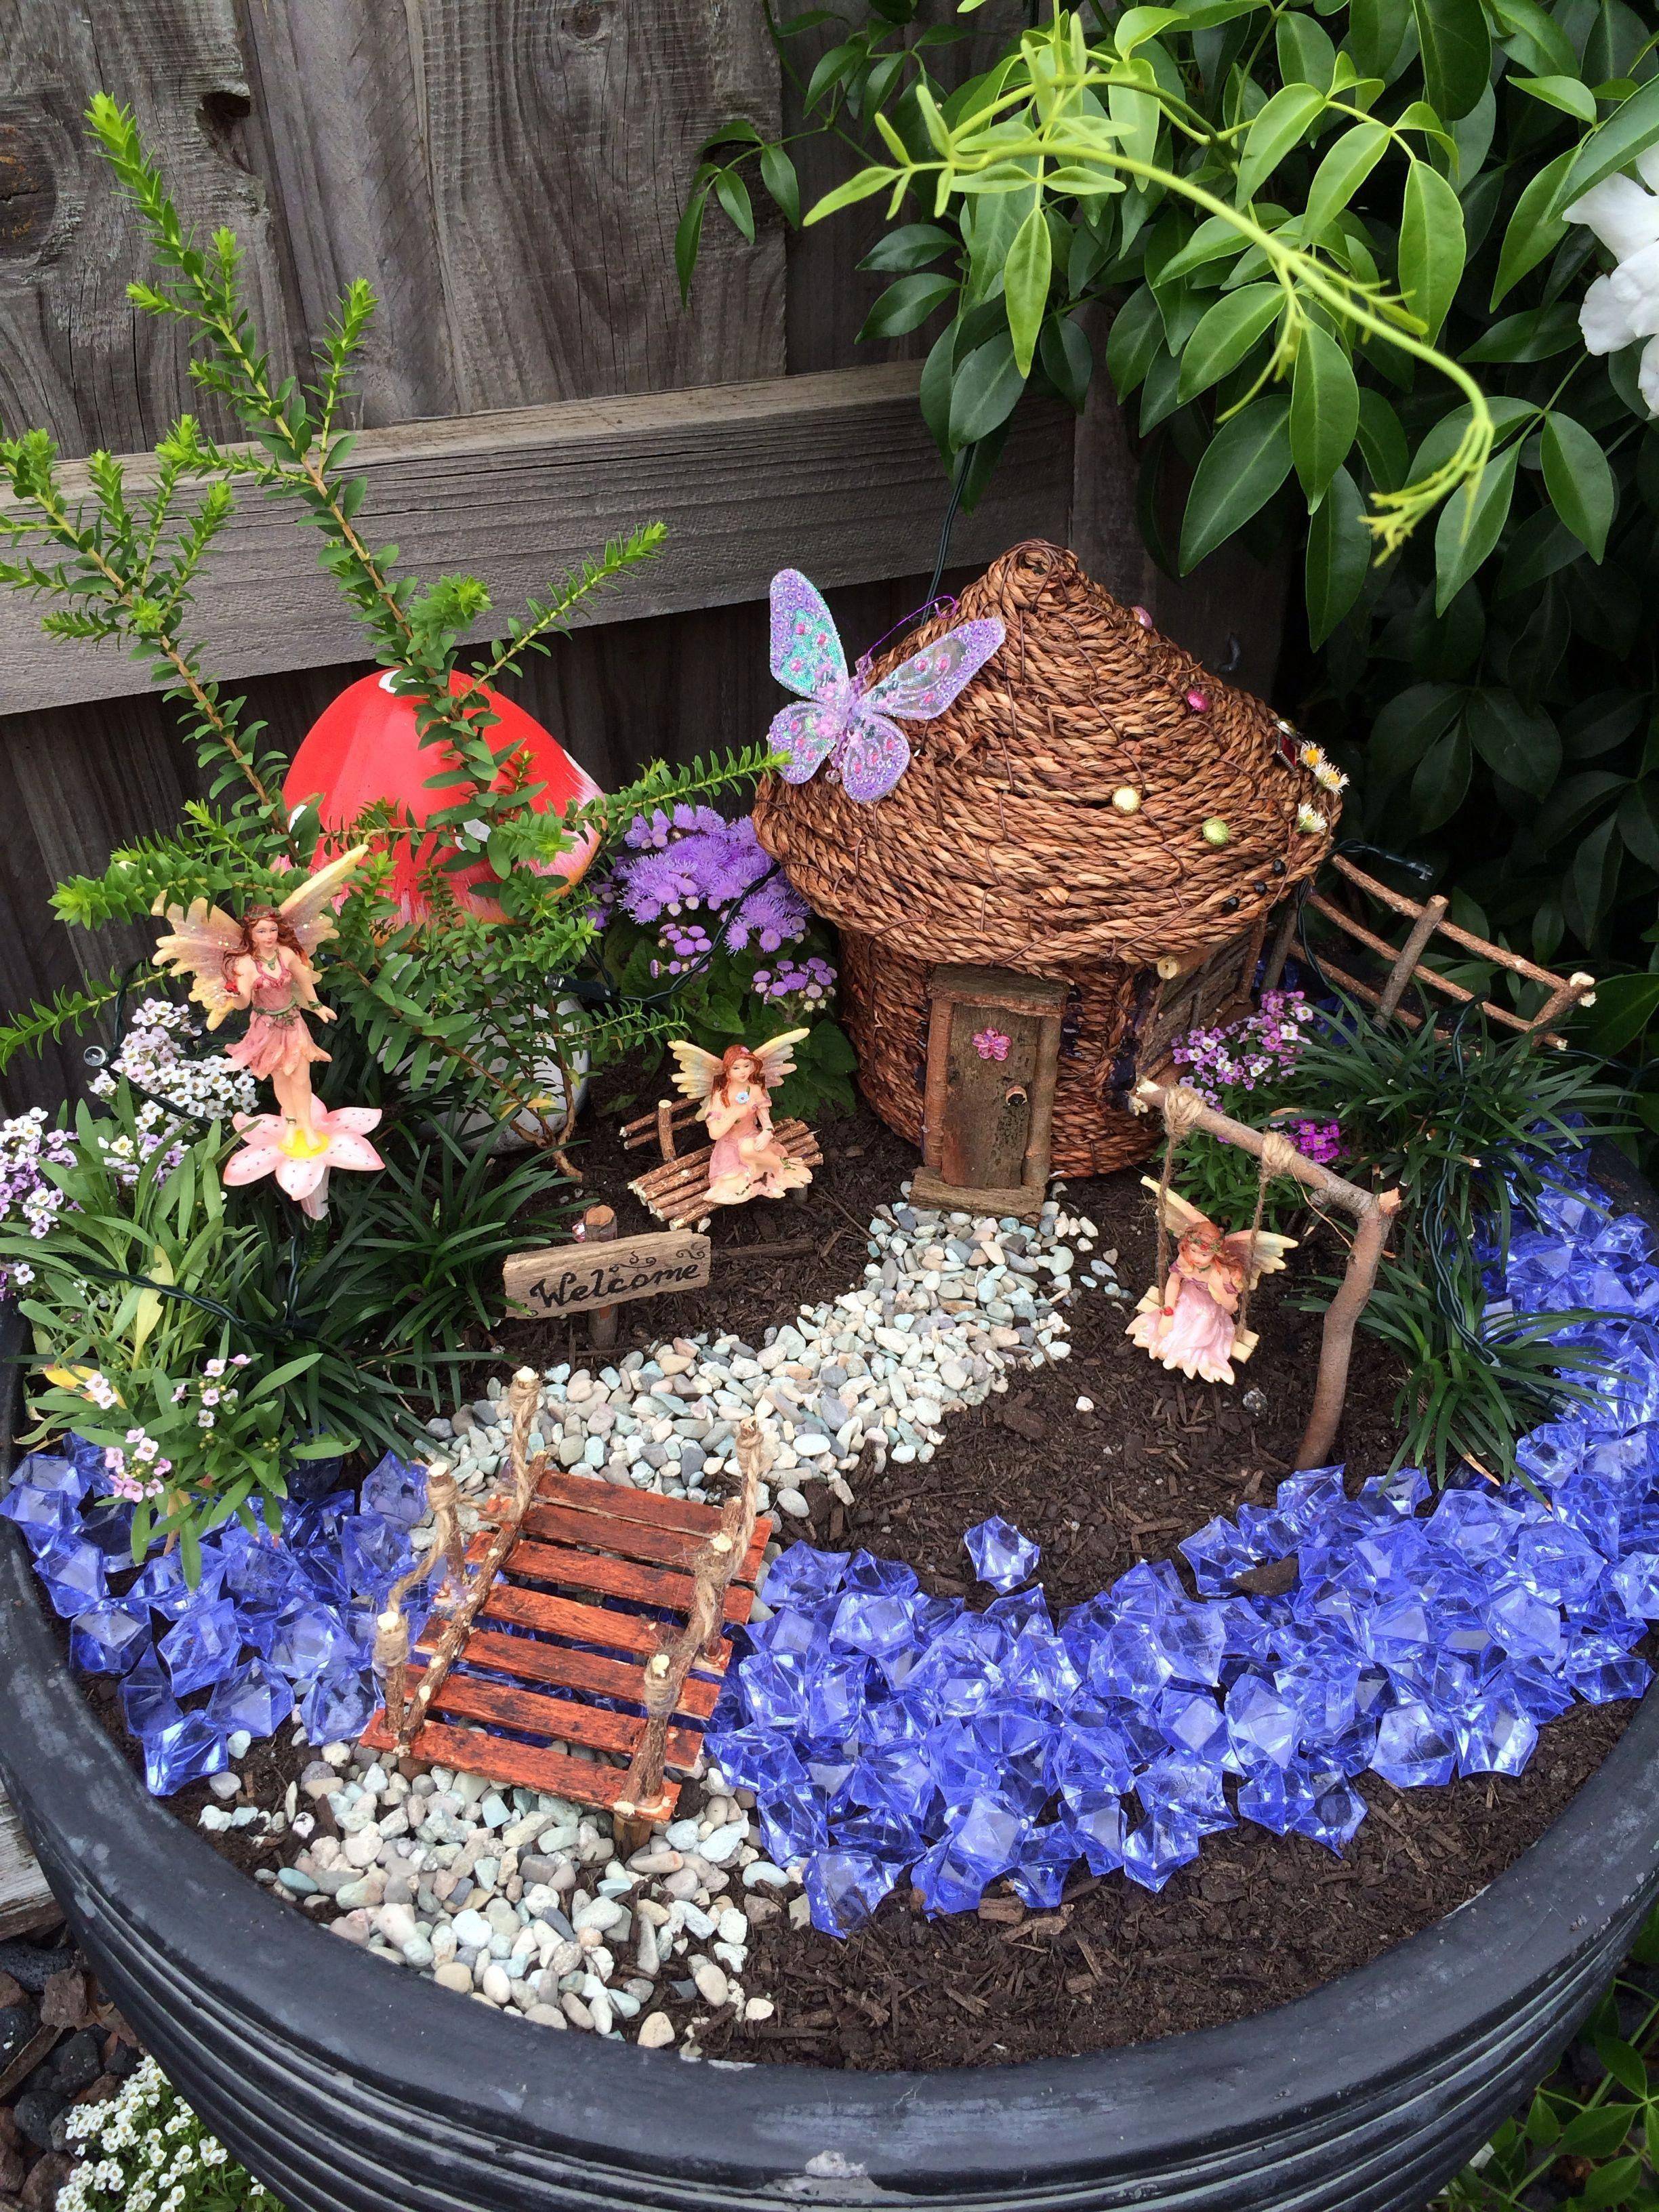 Edible Landscaping And Fairy Gardens